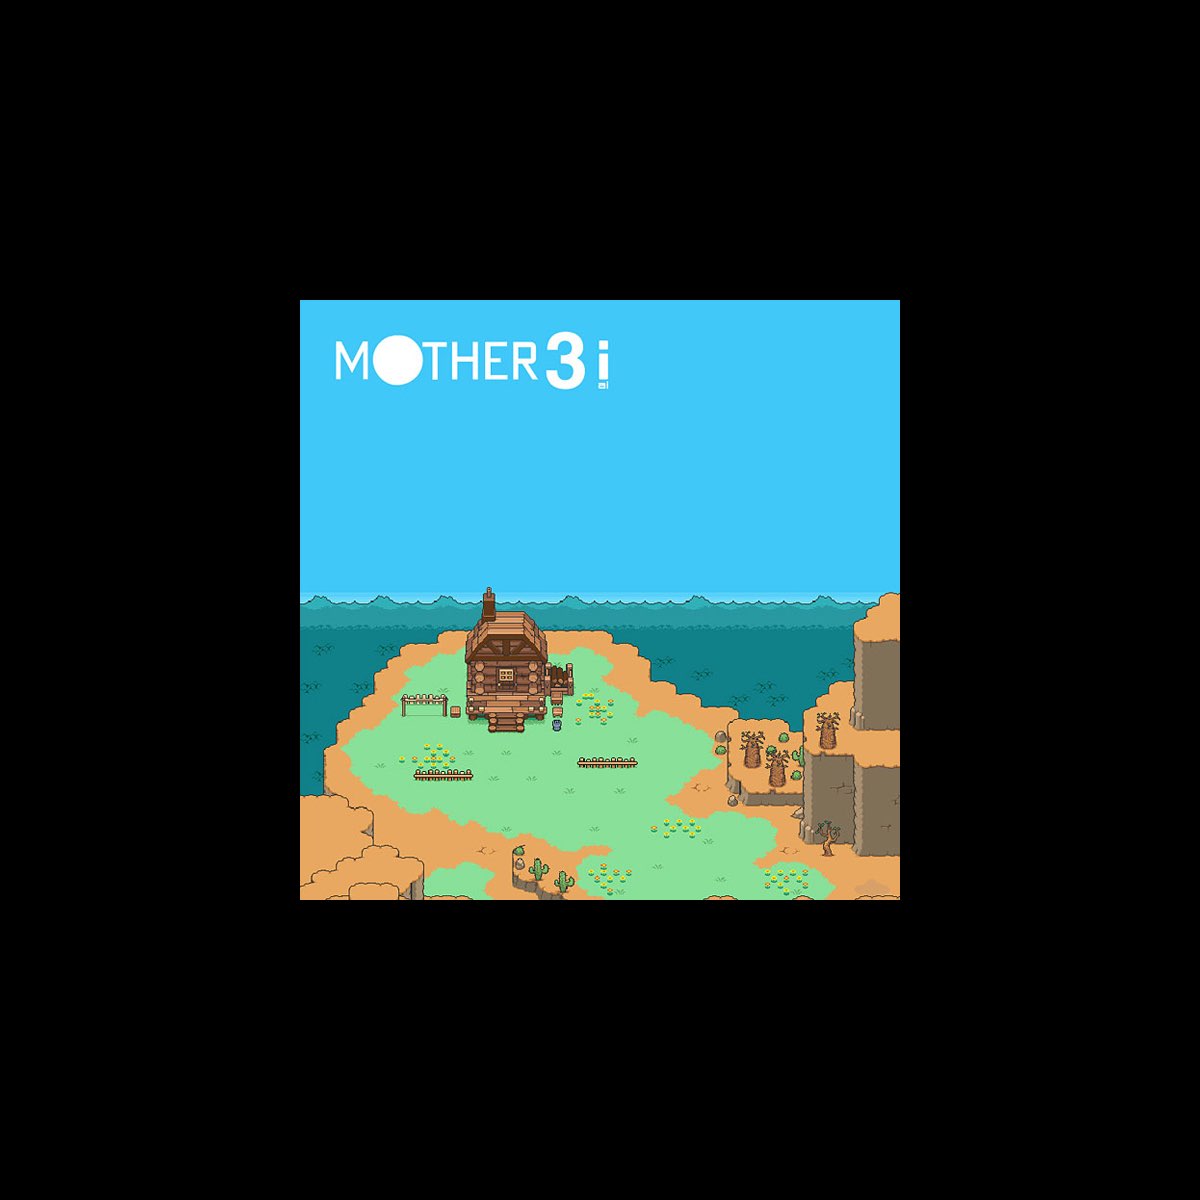 MOTHER3i - MOTHER3のアルバム - Apple Music